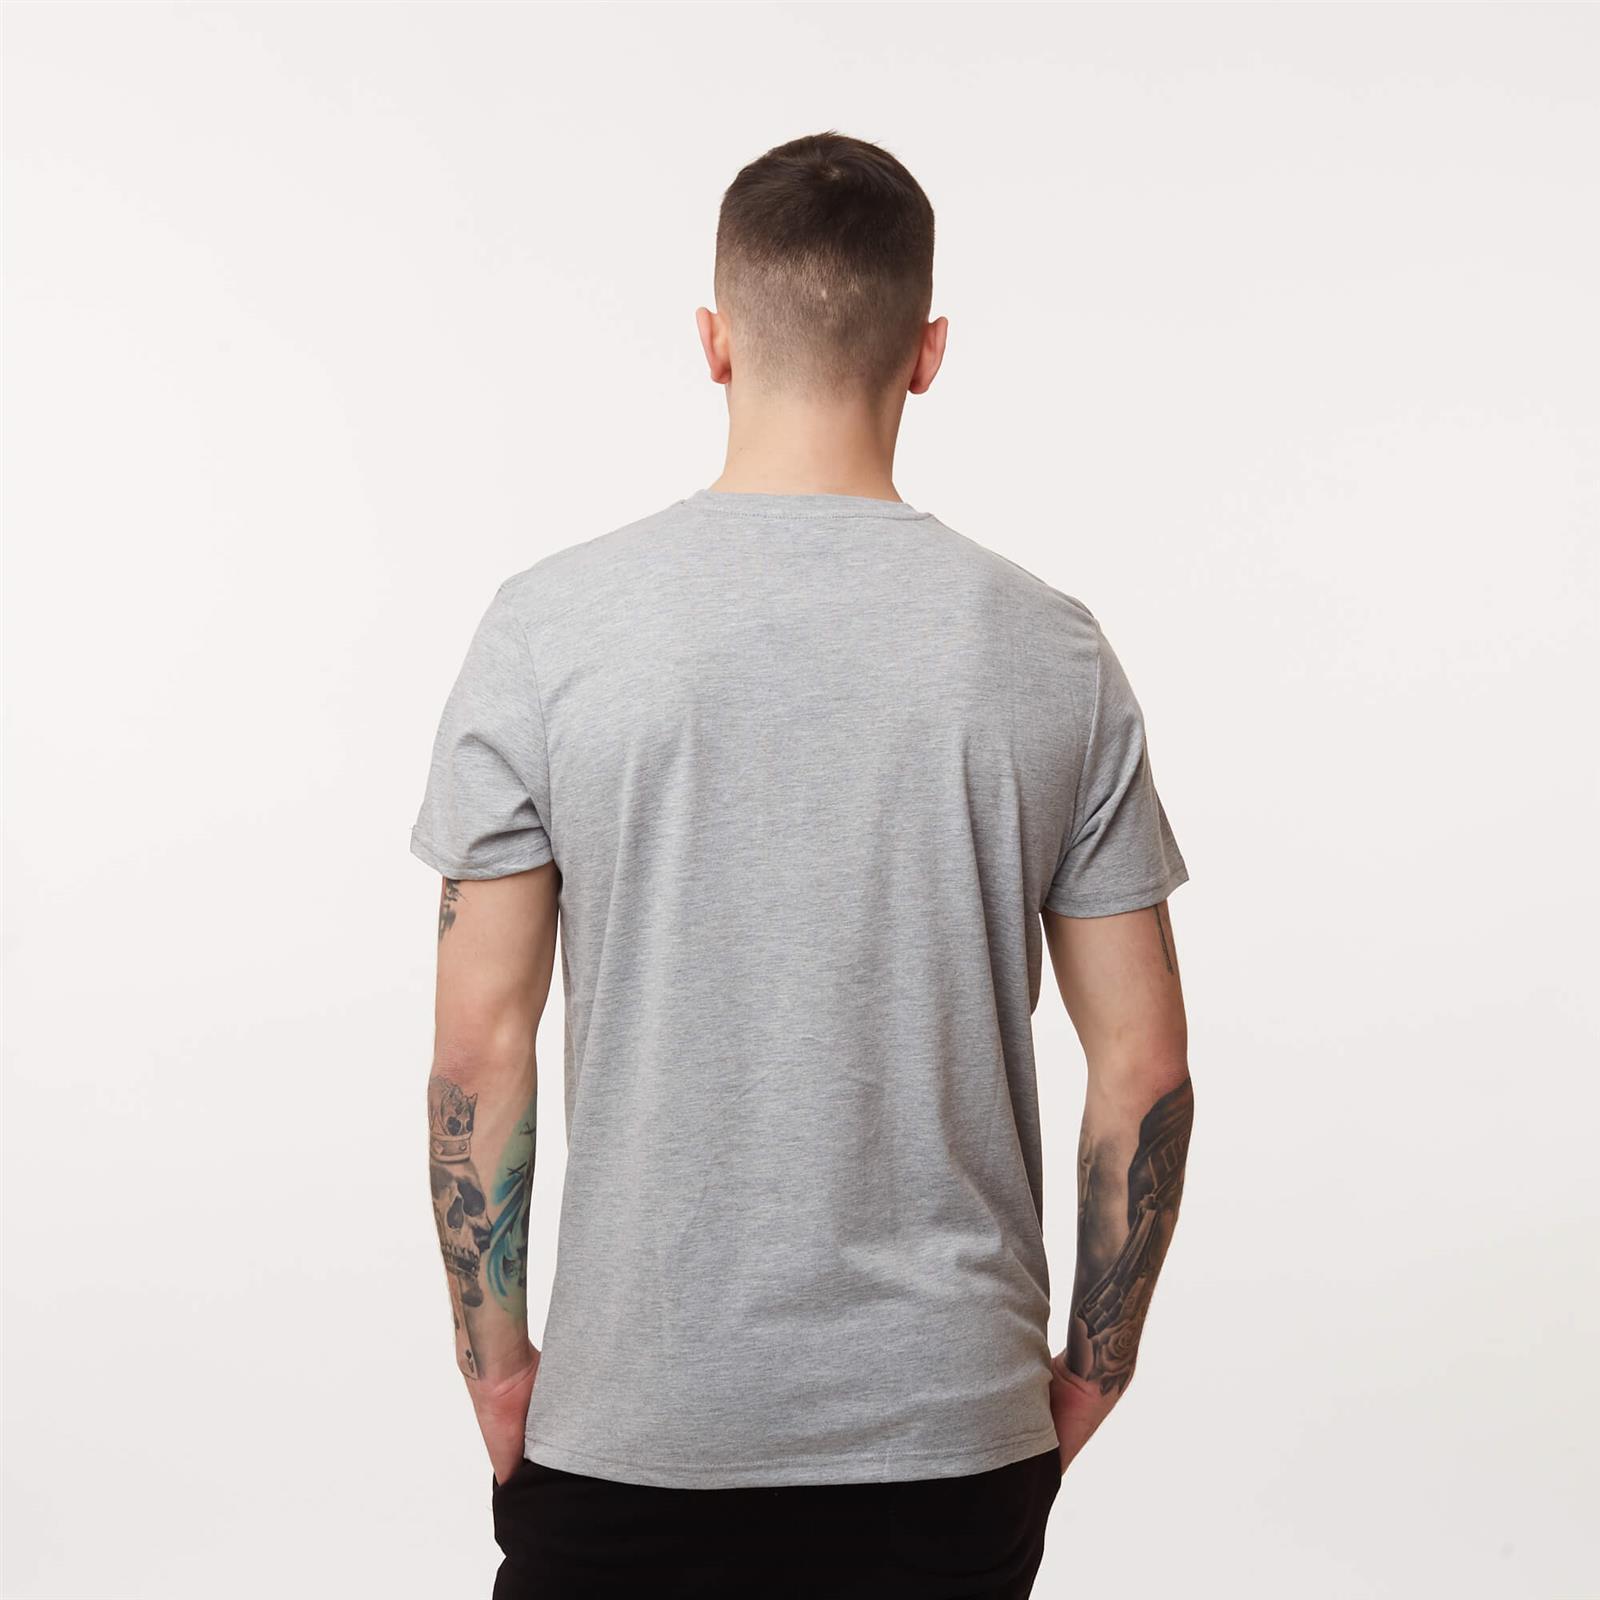 | clothing Men #Brands #Recommended Men HEATHER \\ \\ BOX clothing T-shirts GREY T-SHIRT Industries Ellesse \\ \\ Alpha LOGO \\ brands Brands Industries Men\'s \\ Alpha